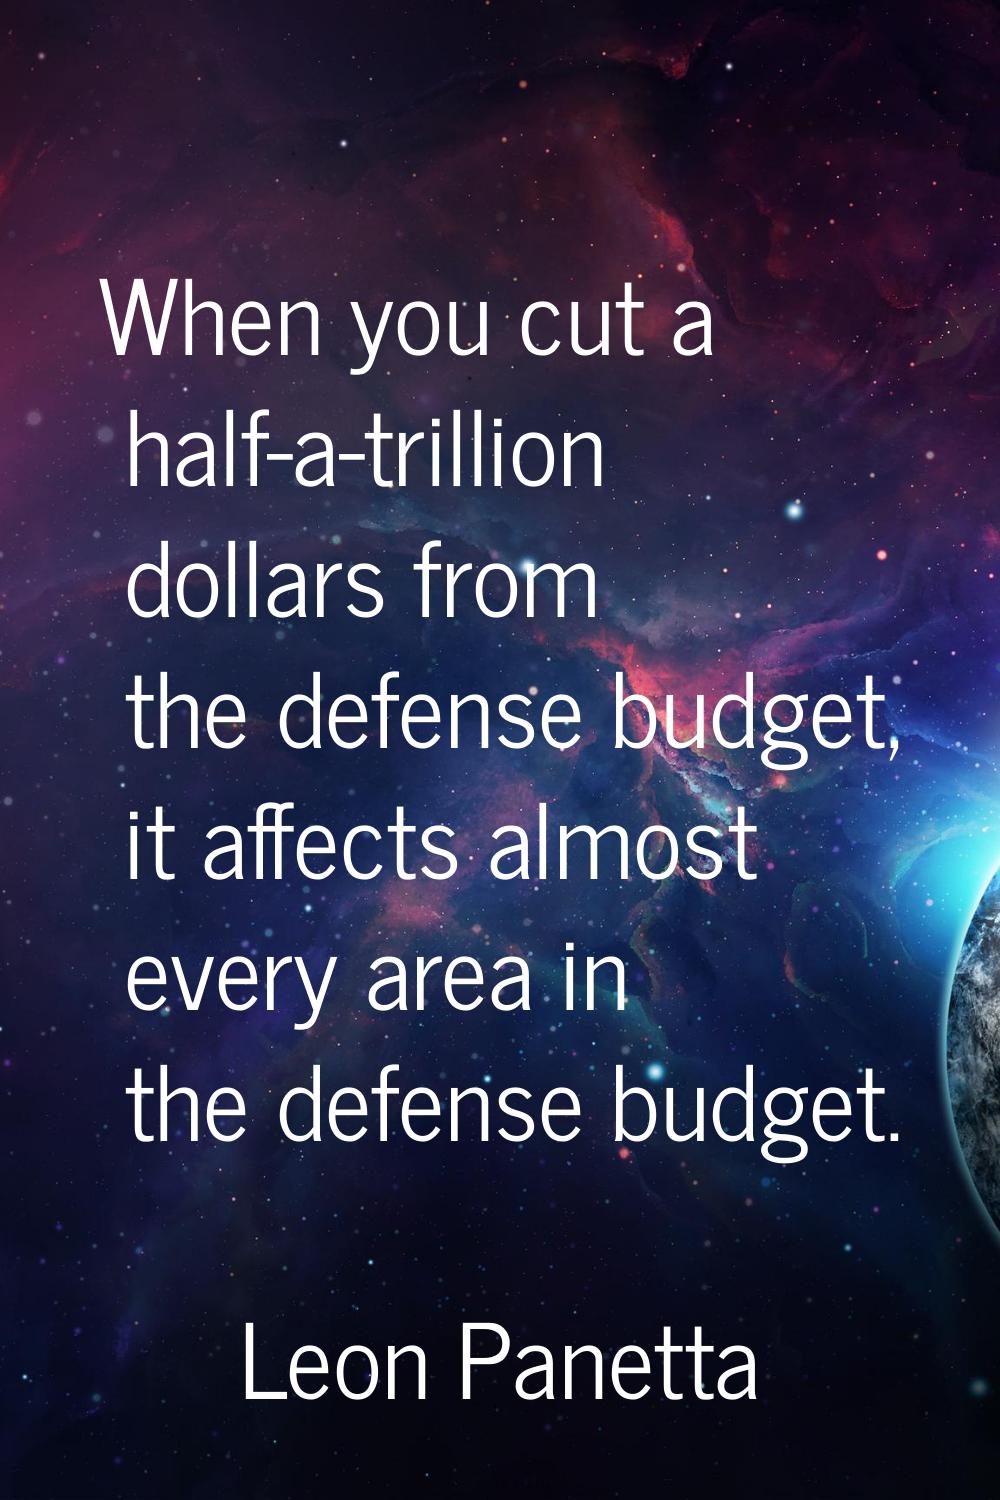 When you cut a half-a-trillion dollars from the defense budget, it affects almost every area in the